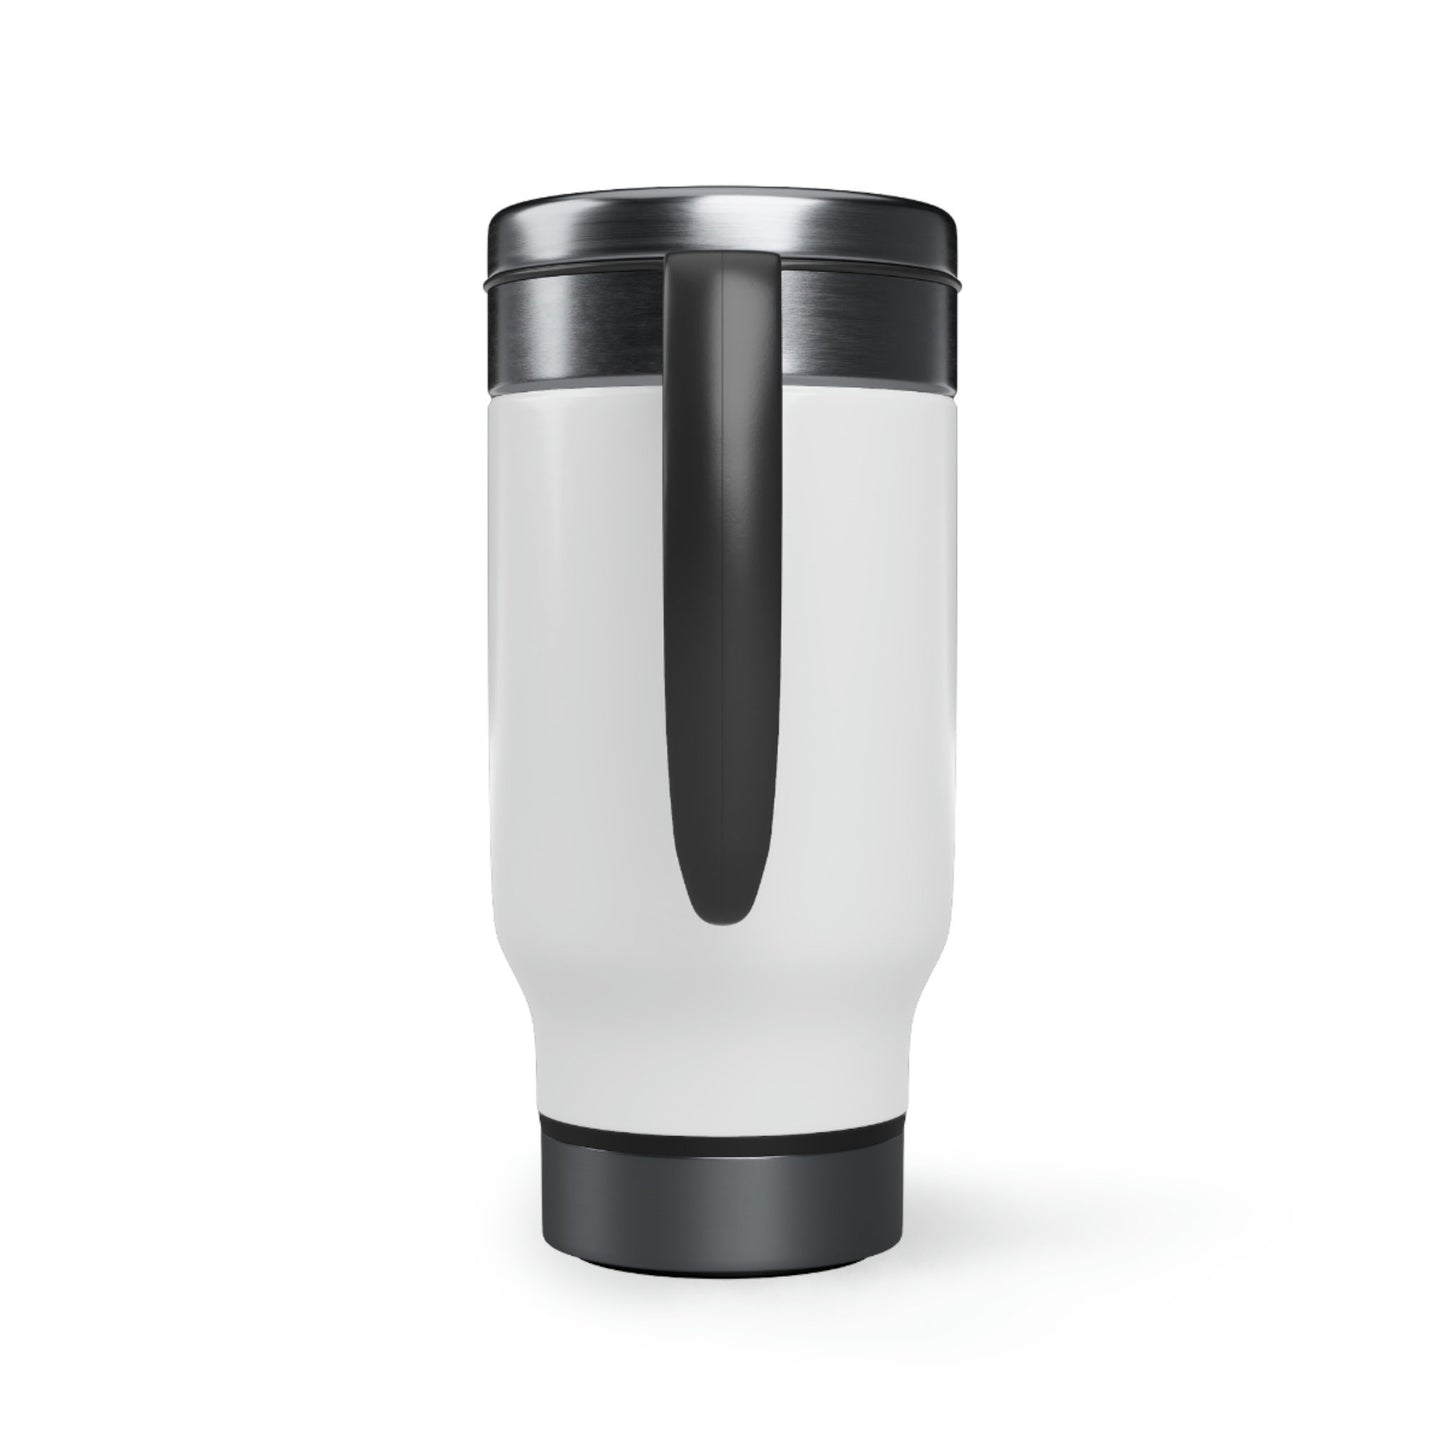 But First Coffee Stainless Steel Travel Mug with Handle, 14oz